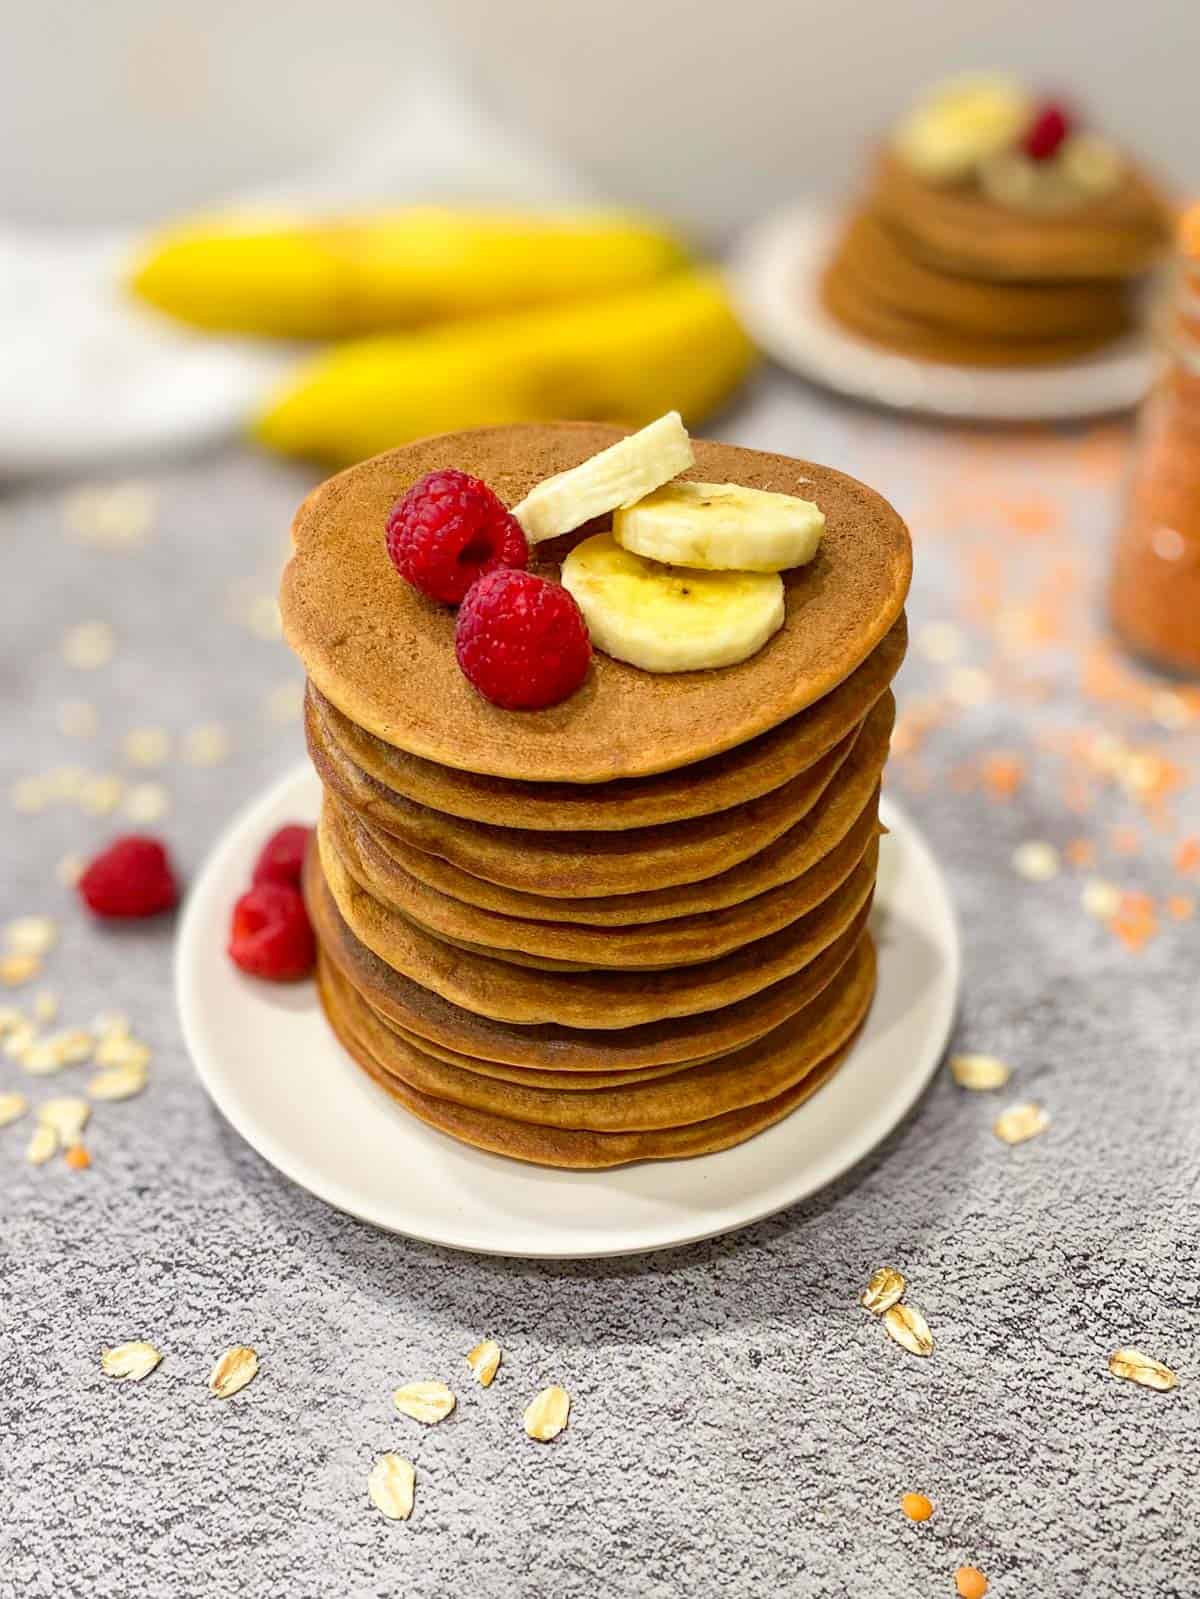 Stack of pancakes on plate with raspberries and banana slices on top.